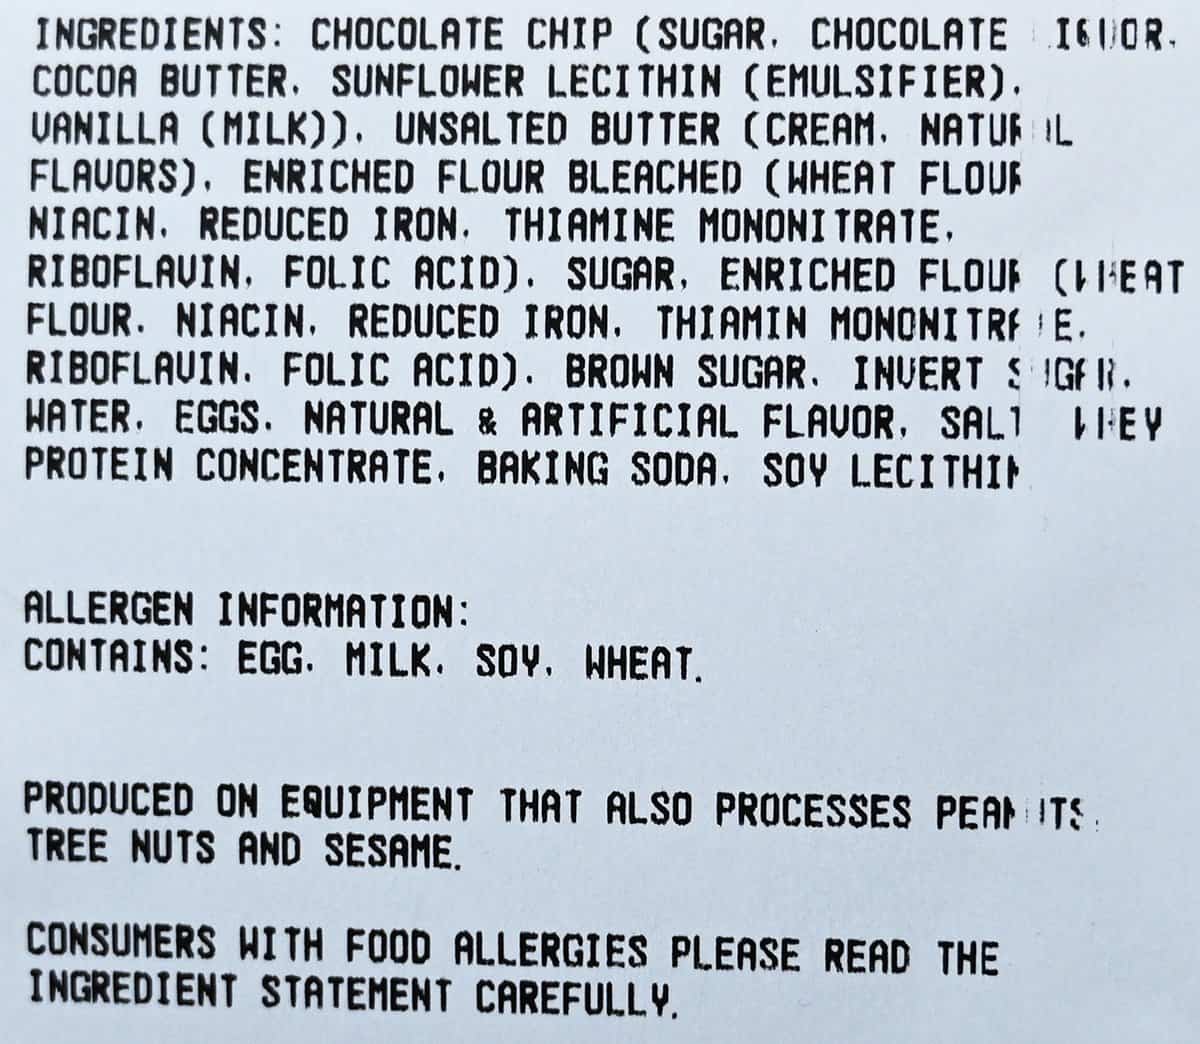 Image of the ingredients label from the package of cookies.